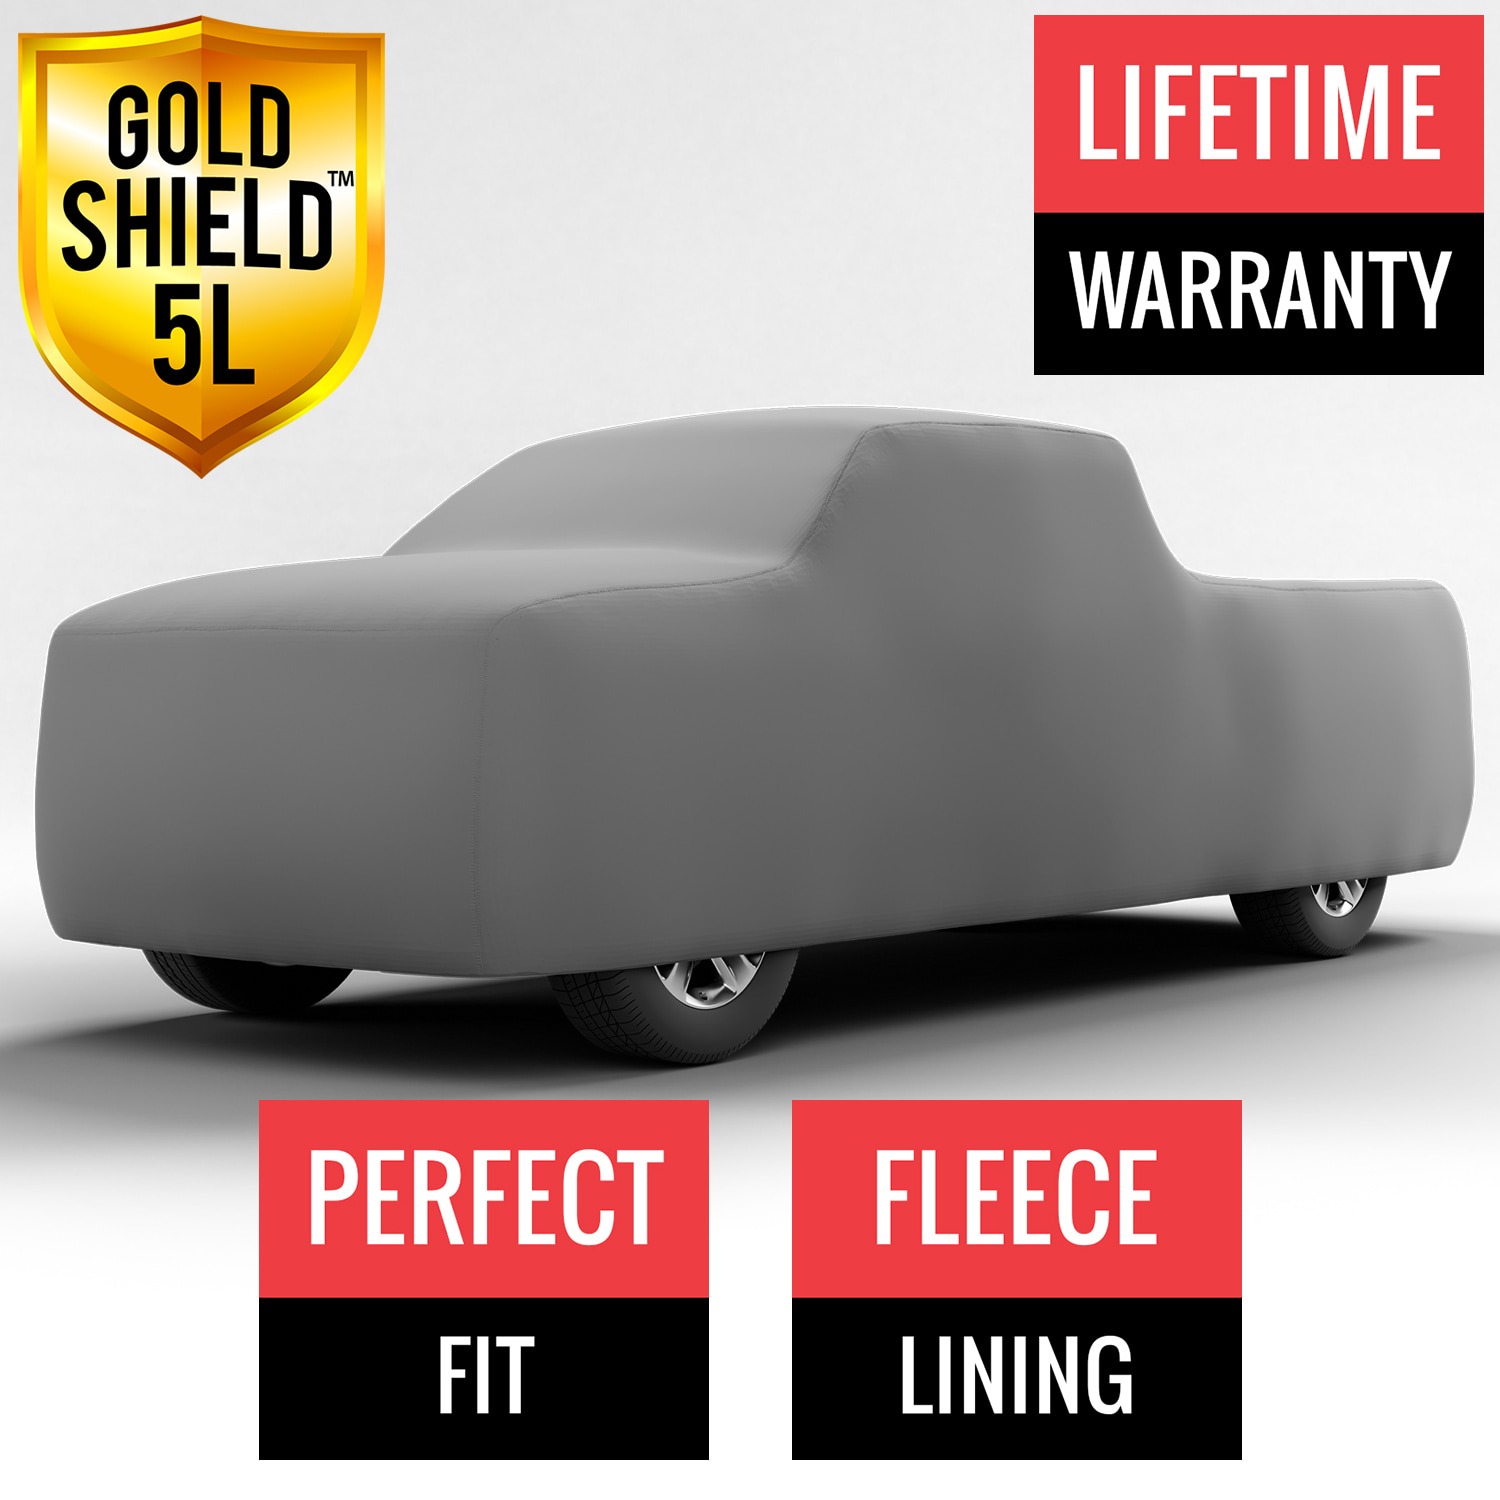 Gold Shield 5L - Car Cover for GMC K15 Pickup 1974 Crew Cab Pickup 8.0 Feet Bed